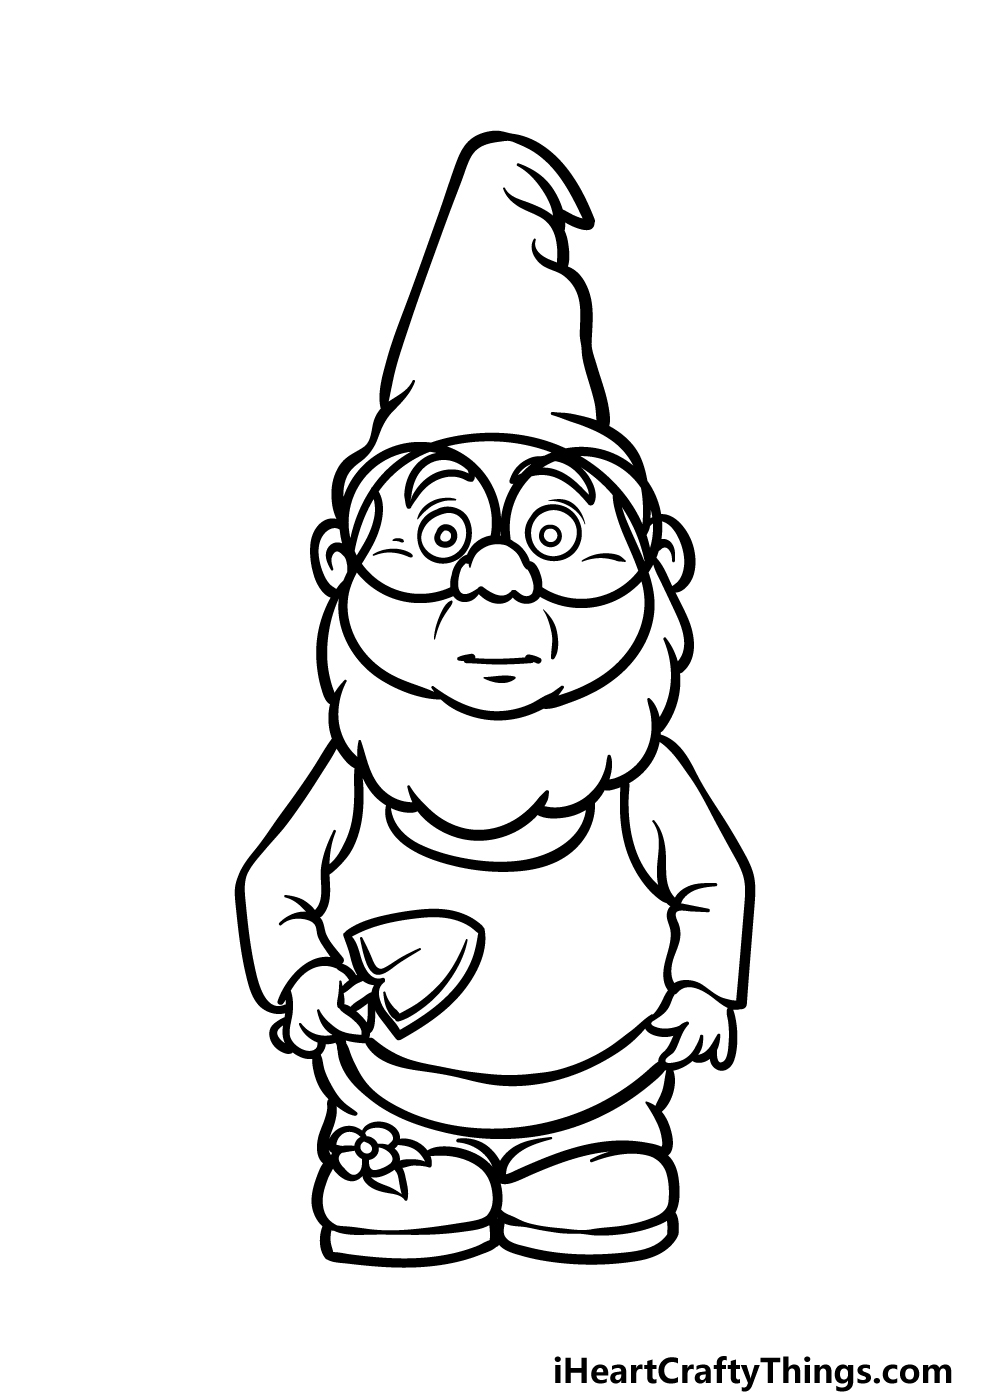 Gnome Drawing - How To Draw A Gnome Step By Step